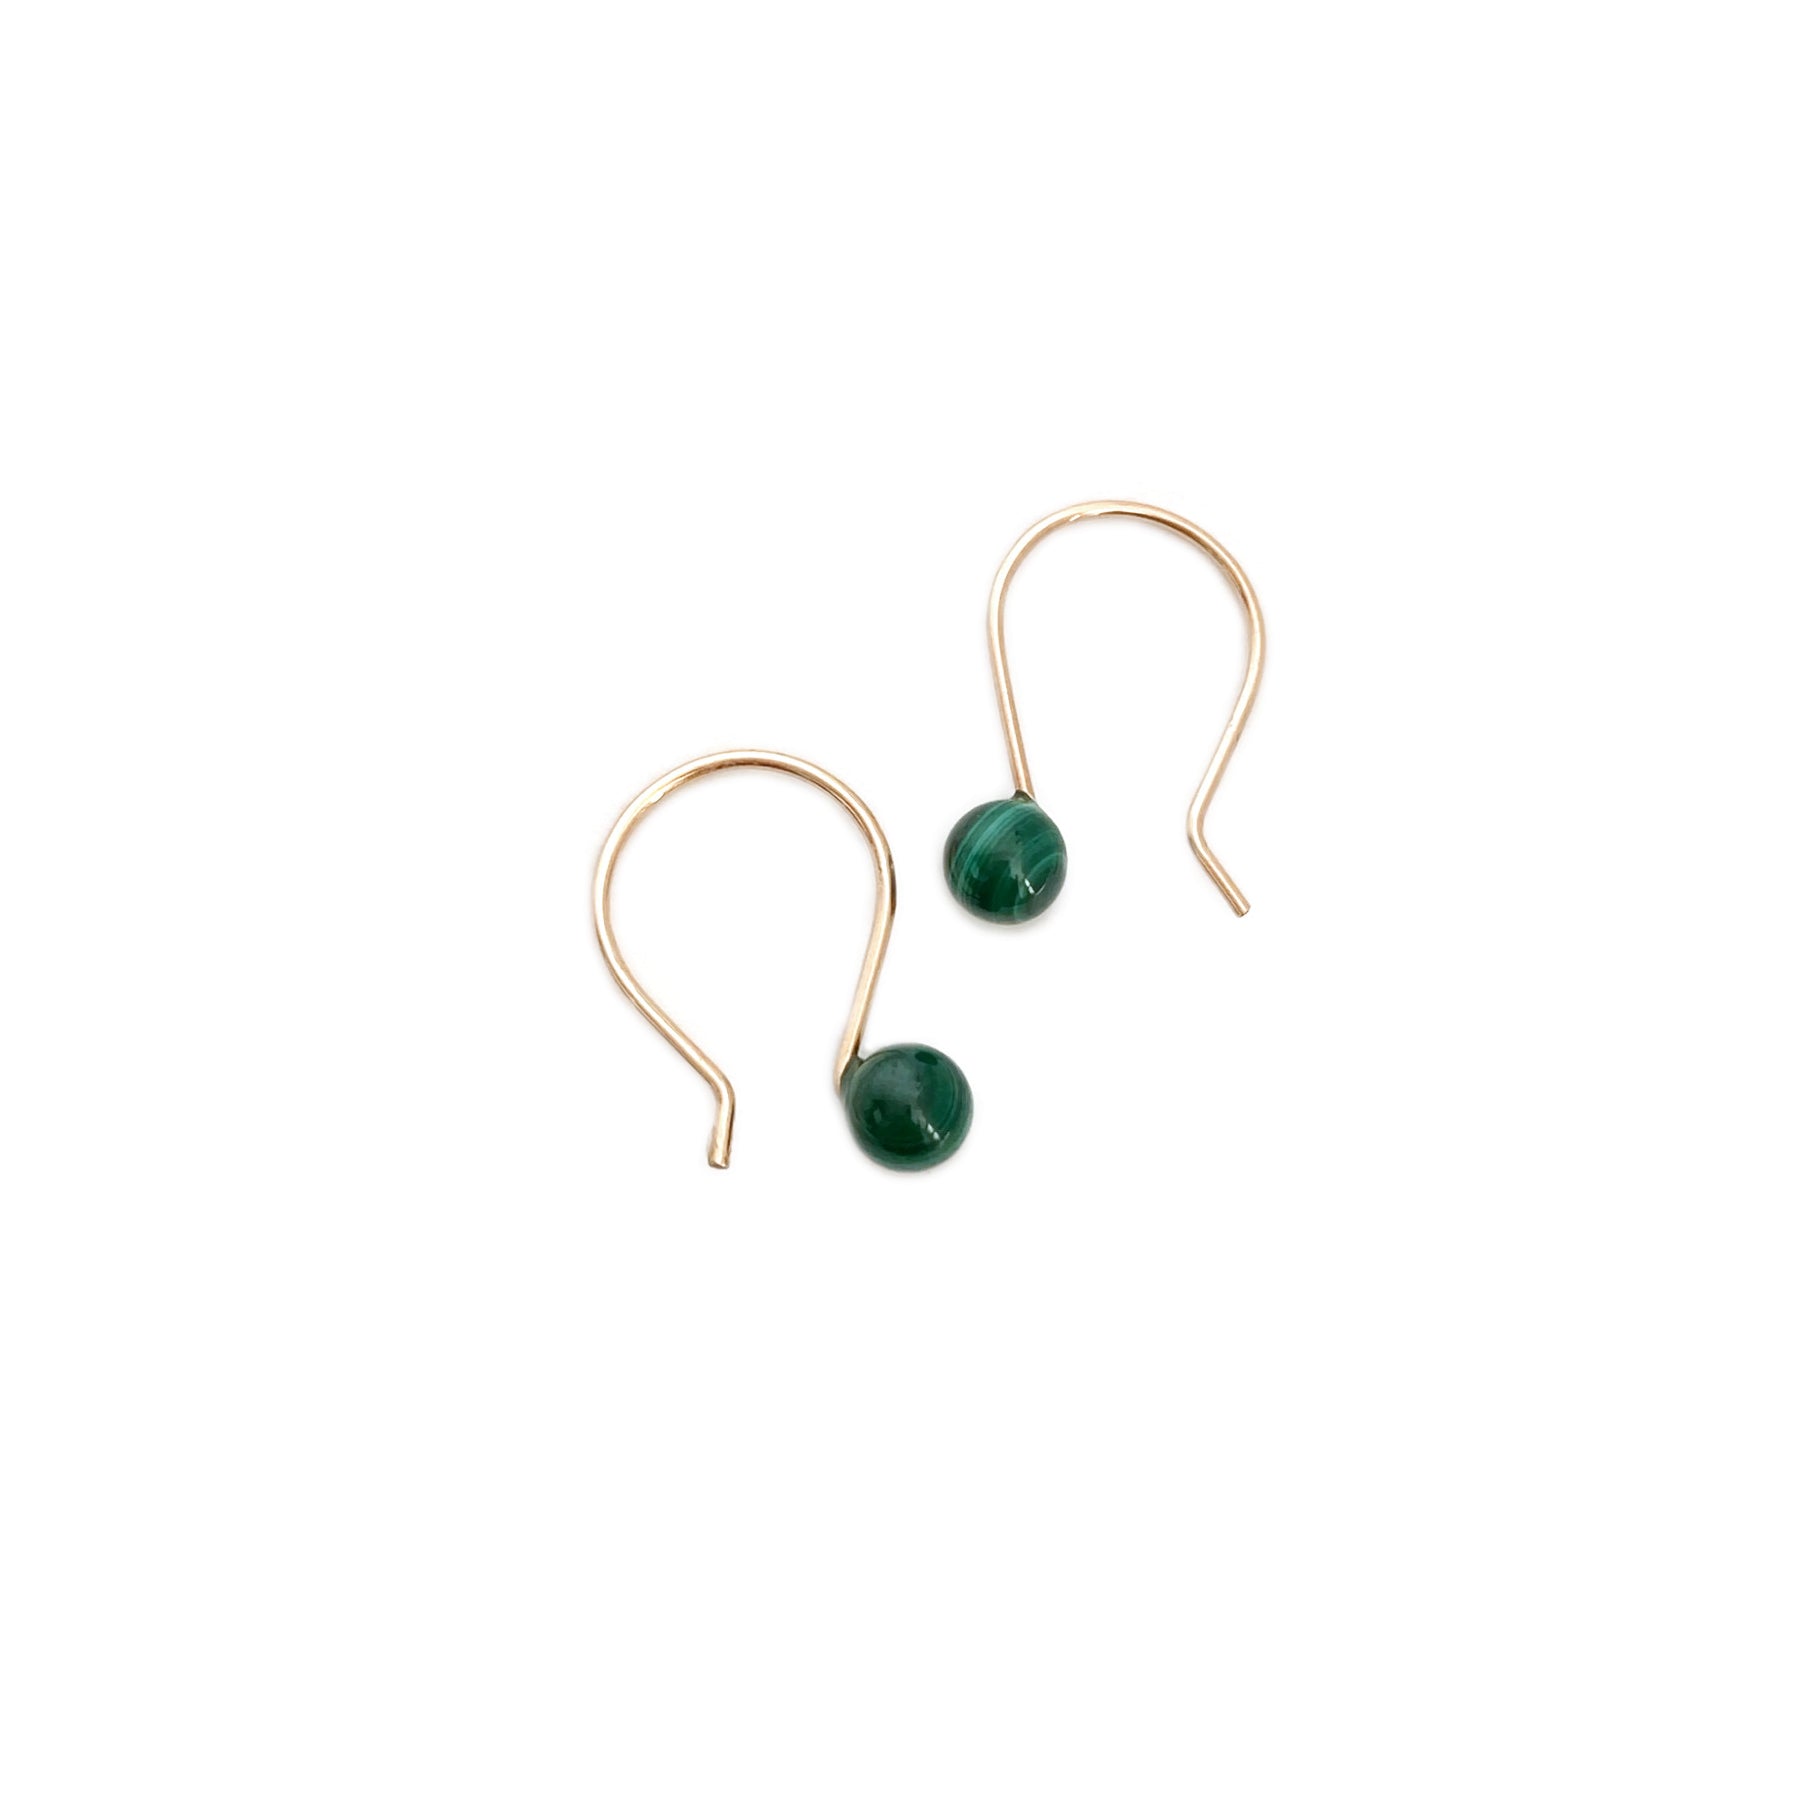 Malachite earrings are made in San Francisco.